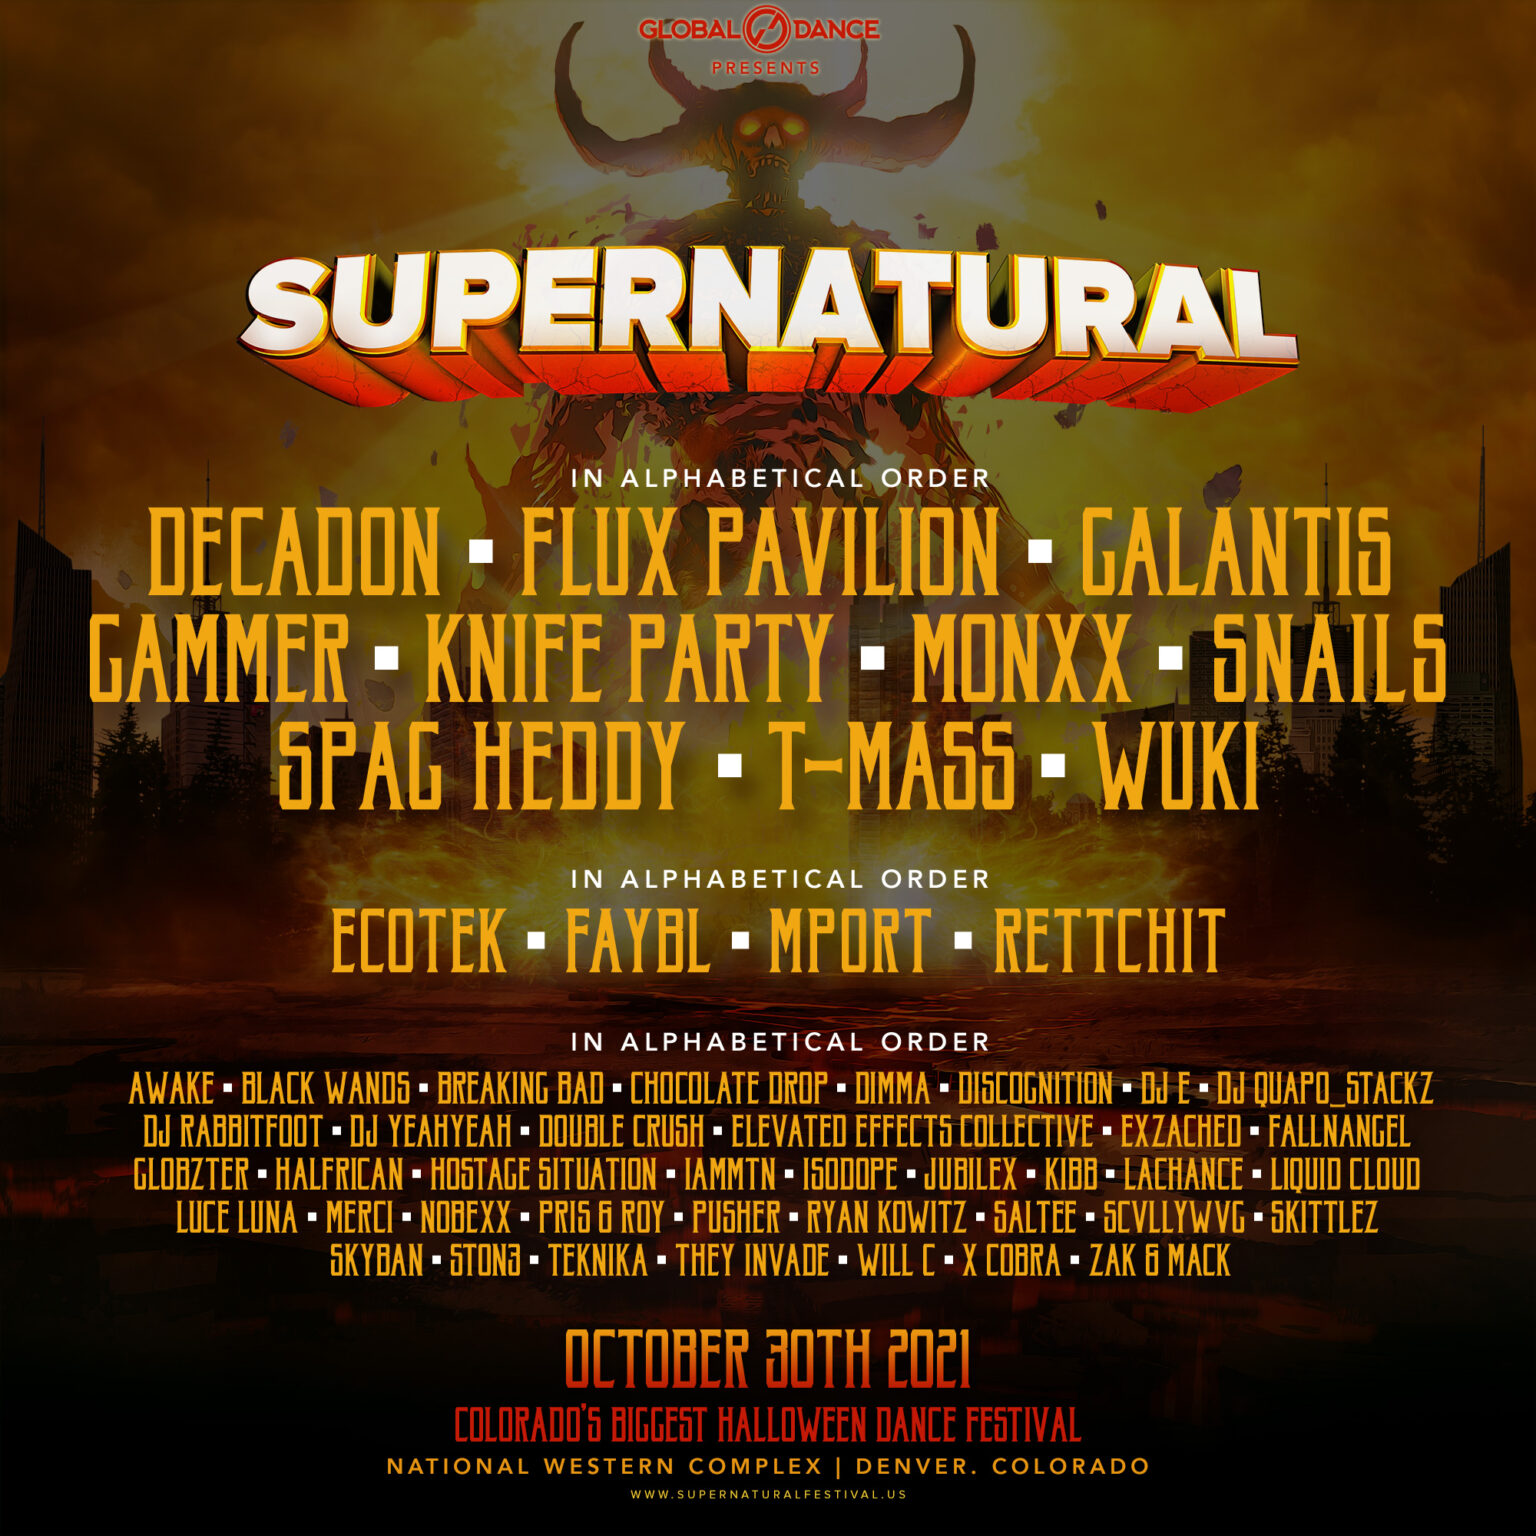 Festival Supernatural Denver, Colo. tickets and lineup on Oct 30